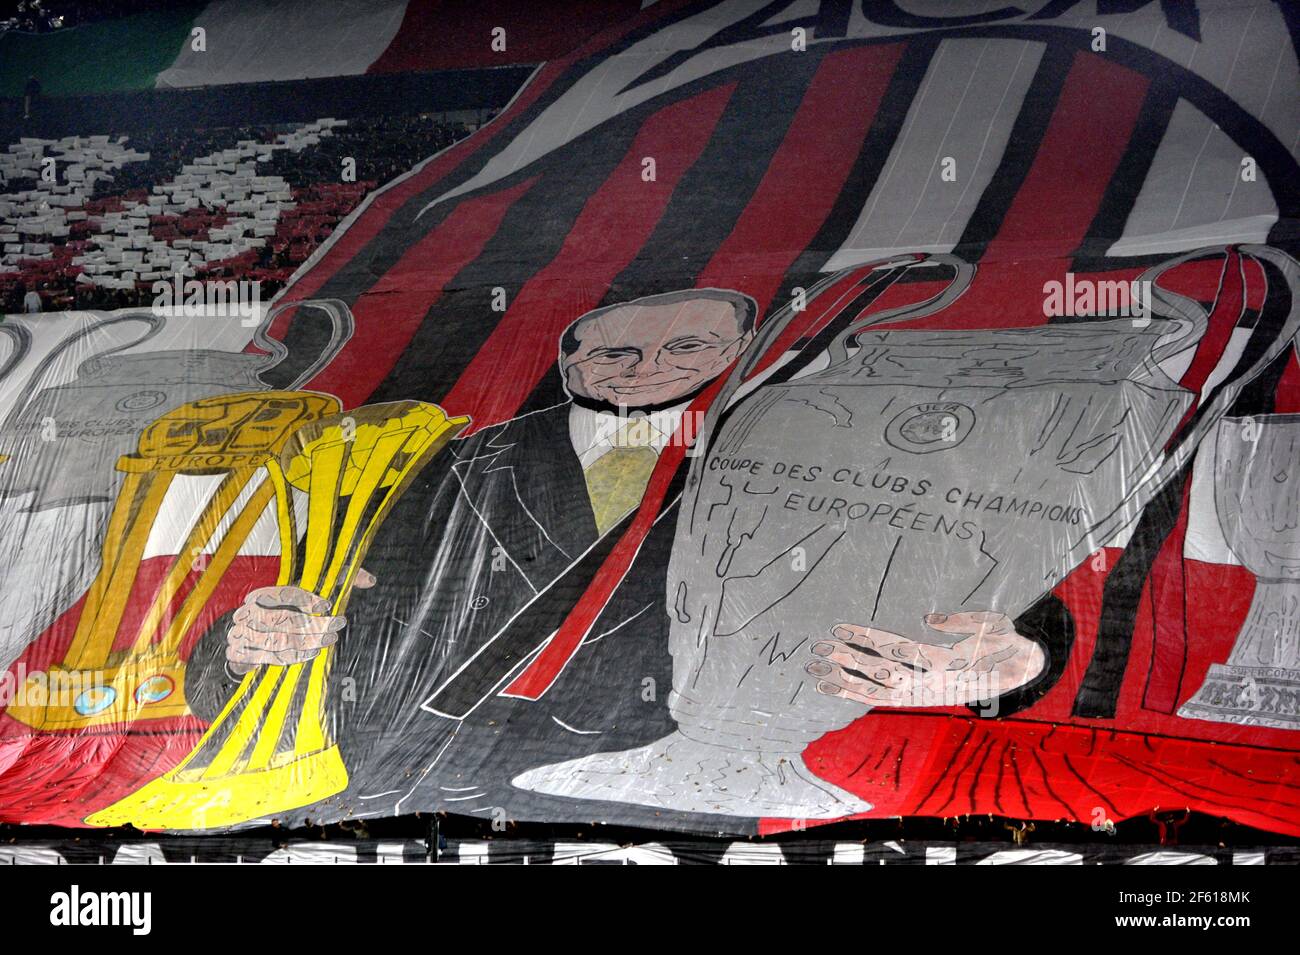 AC Milan football fans showing a coreography with the president Silvio Berlusconi holding a trophy at the San Siro stadium, in Milan, Italy. Stock Photo